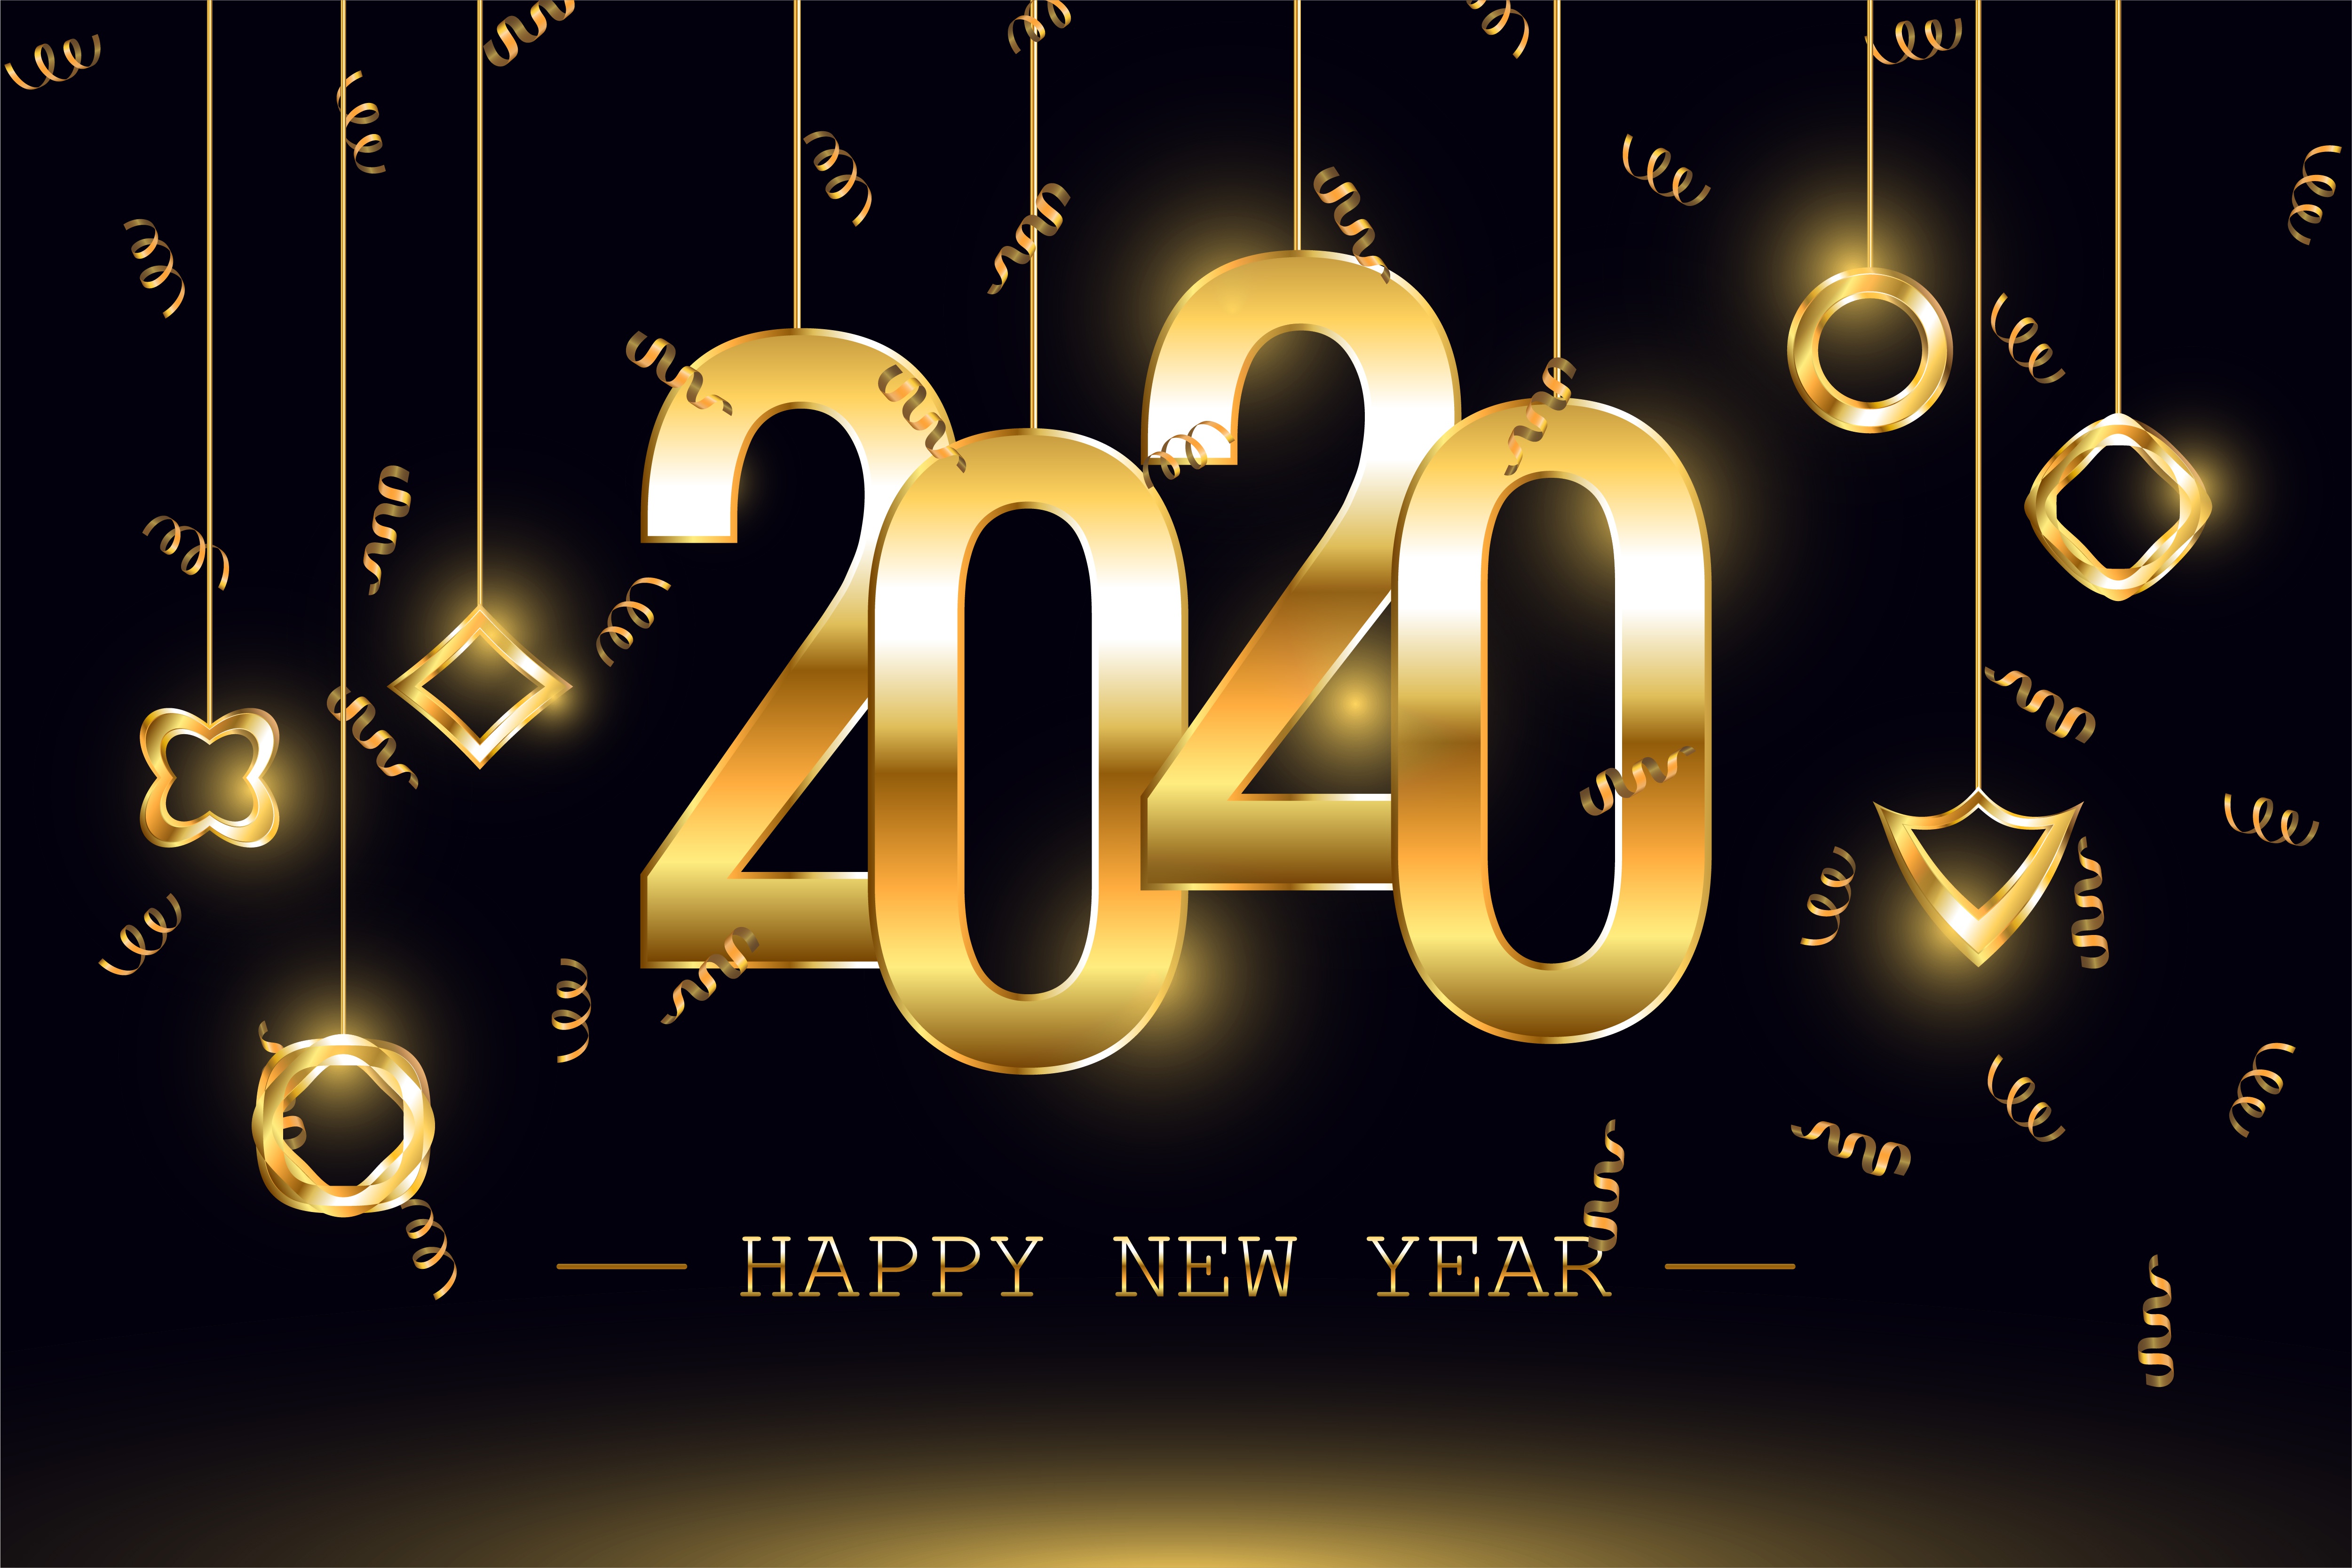 holiday, new year 2020, happy new year, new year